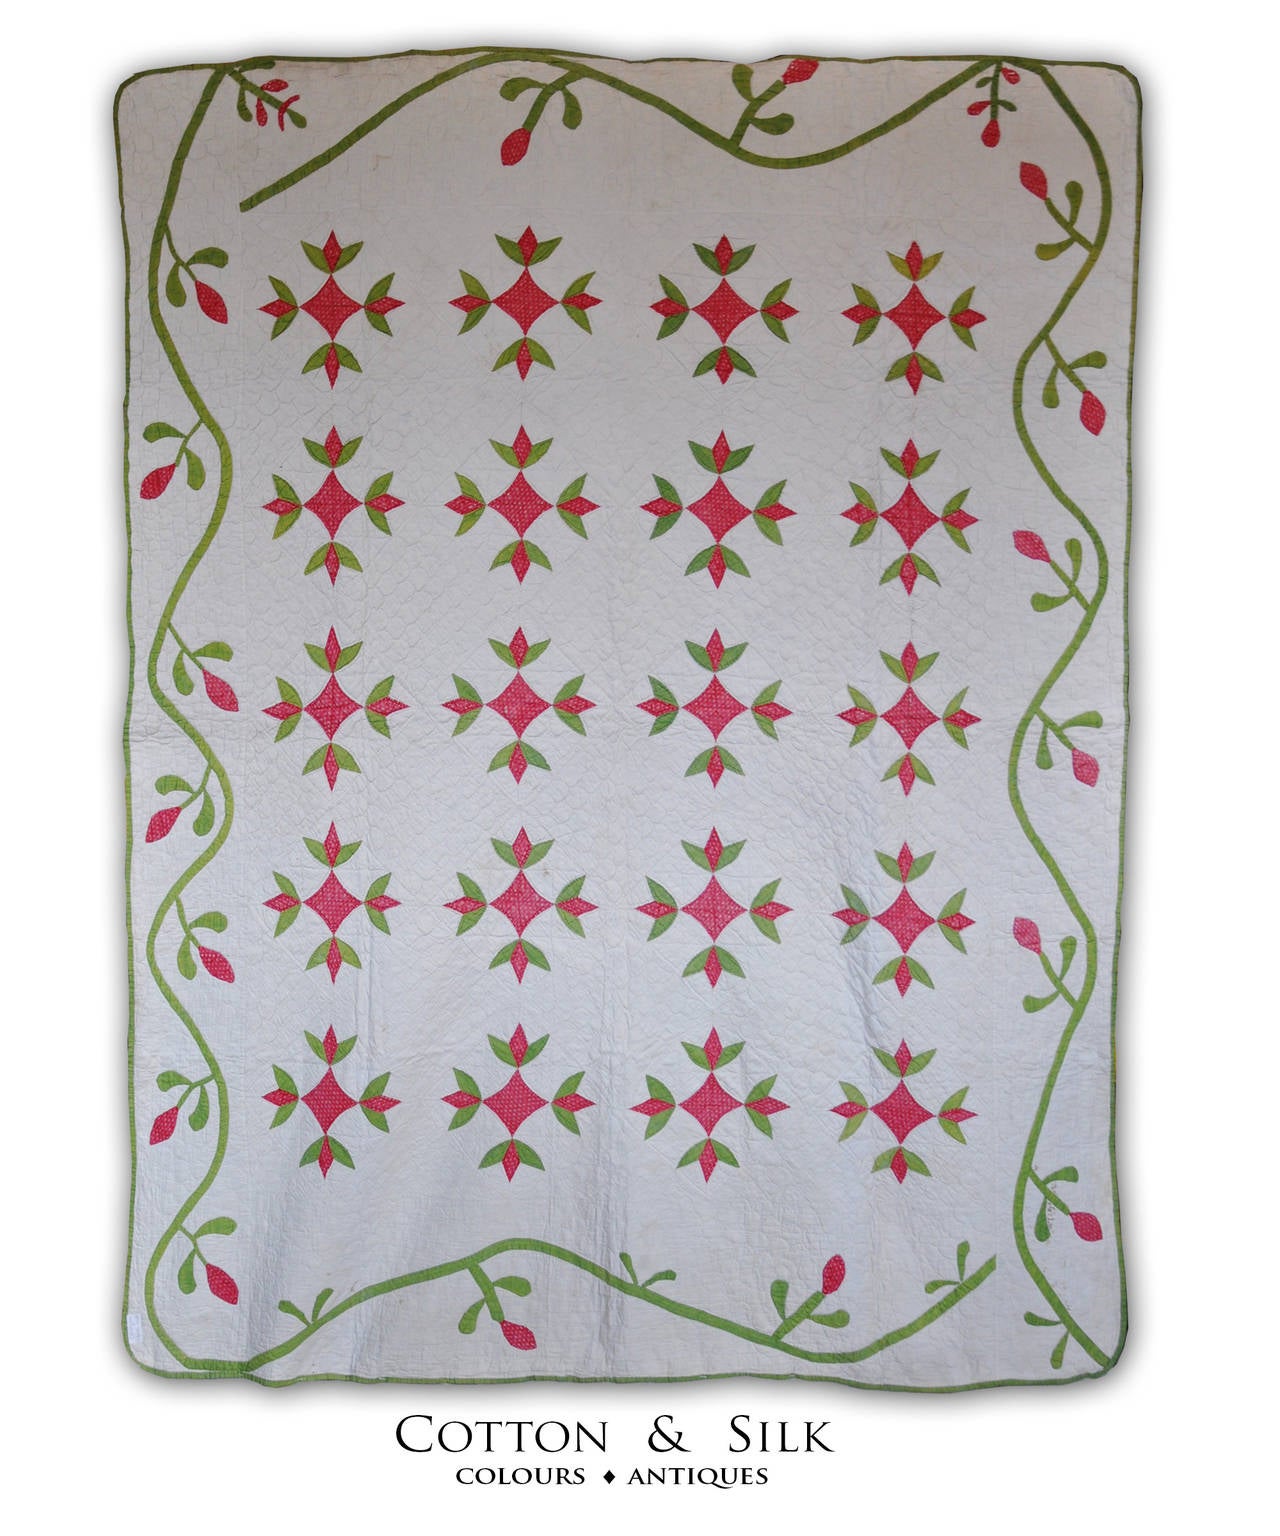 This is an applique quilt with red tulips on an arab tent ,surrounded by an elegant guirlande of buttonning flowers